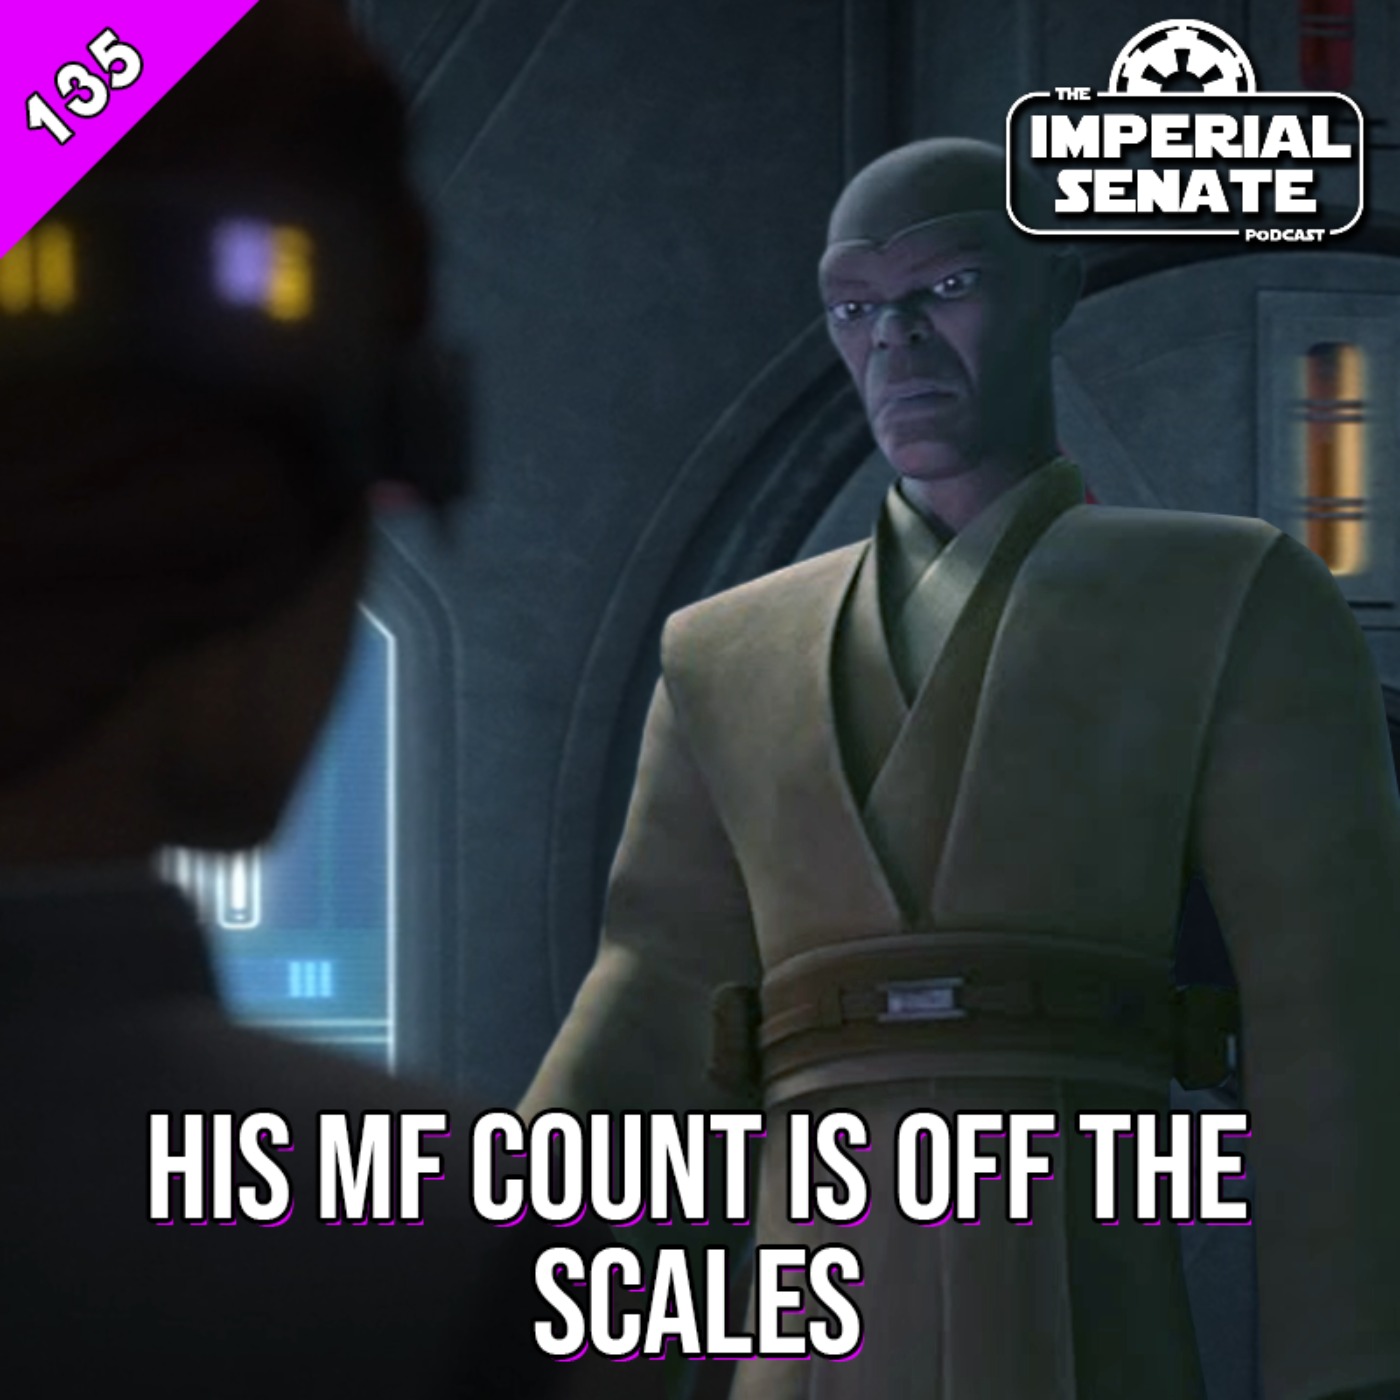 The Imperial Senate Podcast: Episode 135 - His MF Count Is Off The Scales